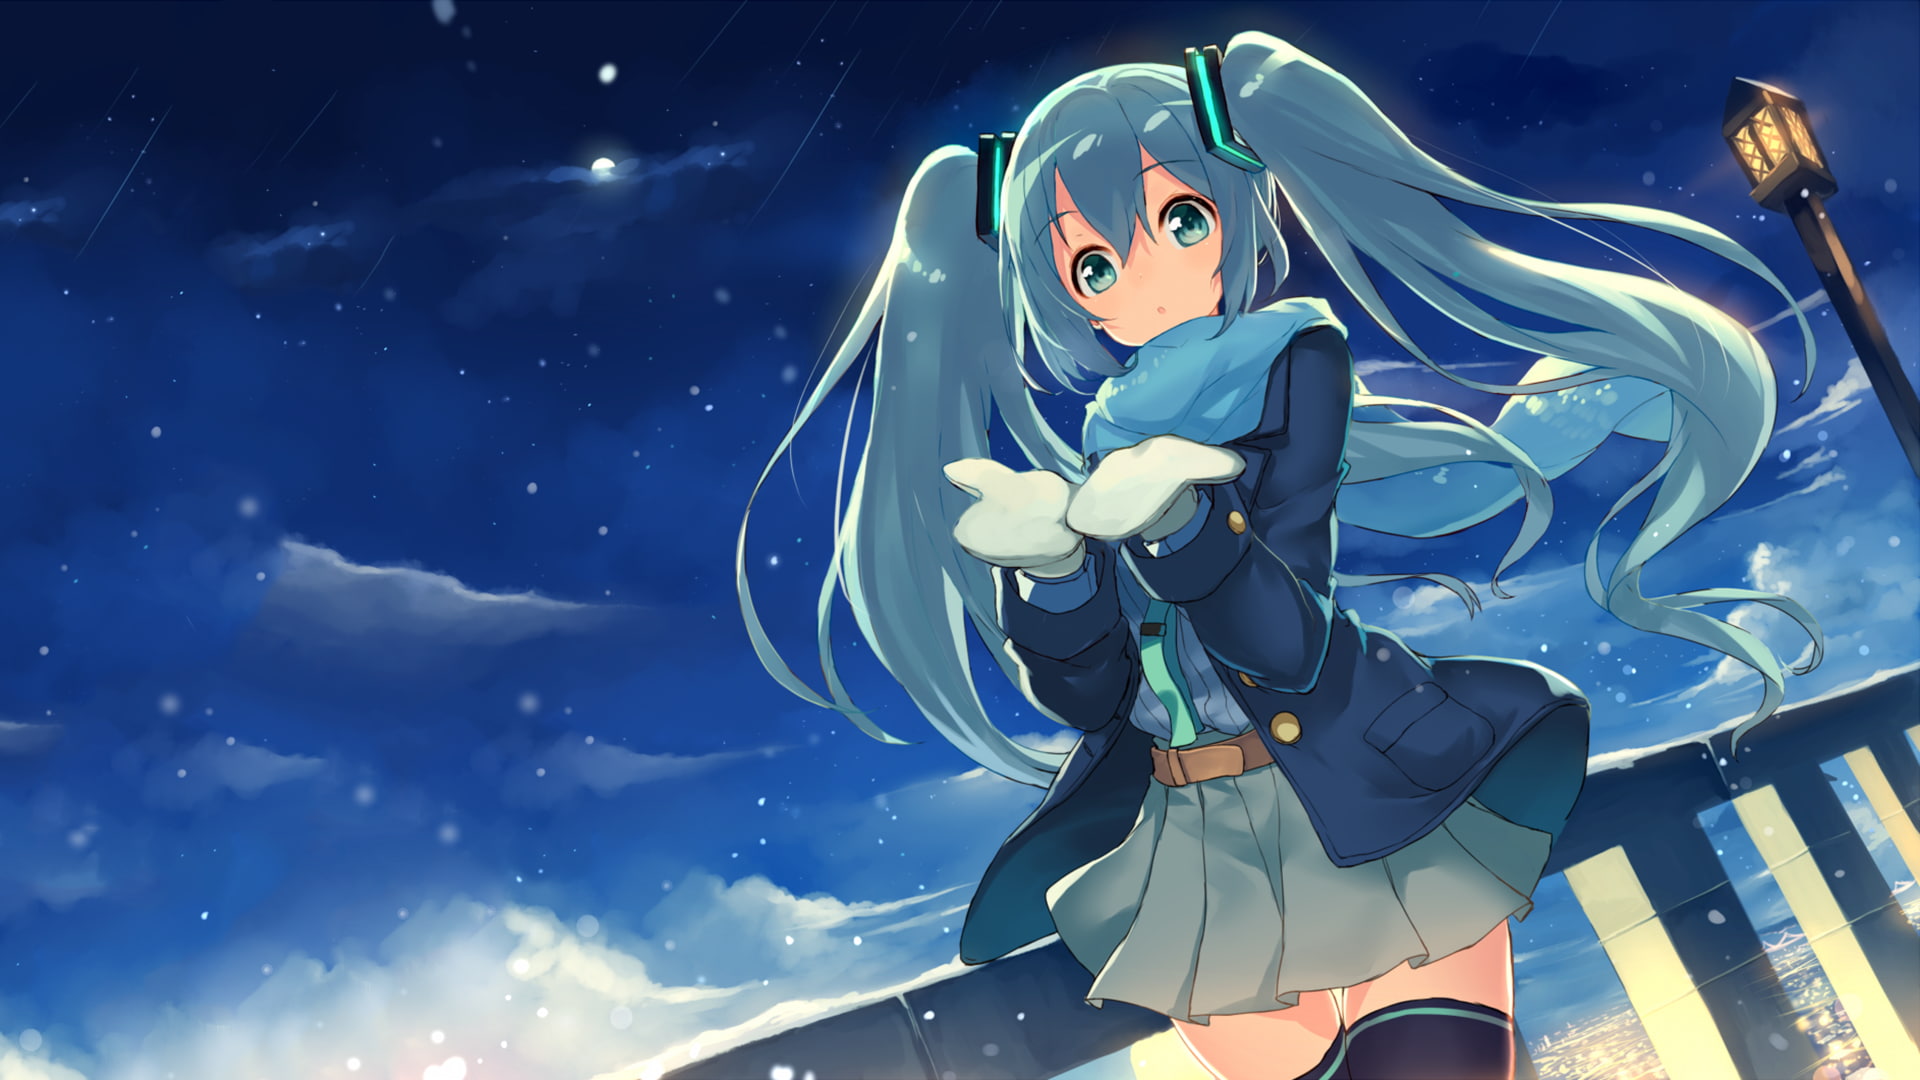 snow, Vocaloid, Hatsune Miku, one person, real people, young adult